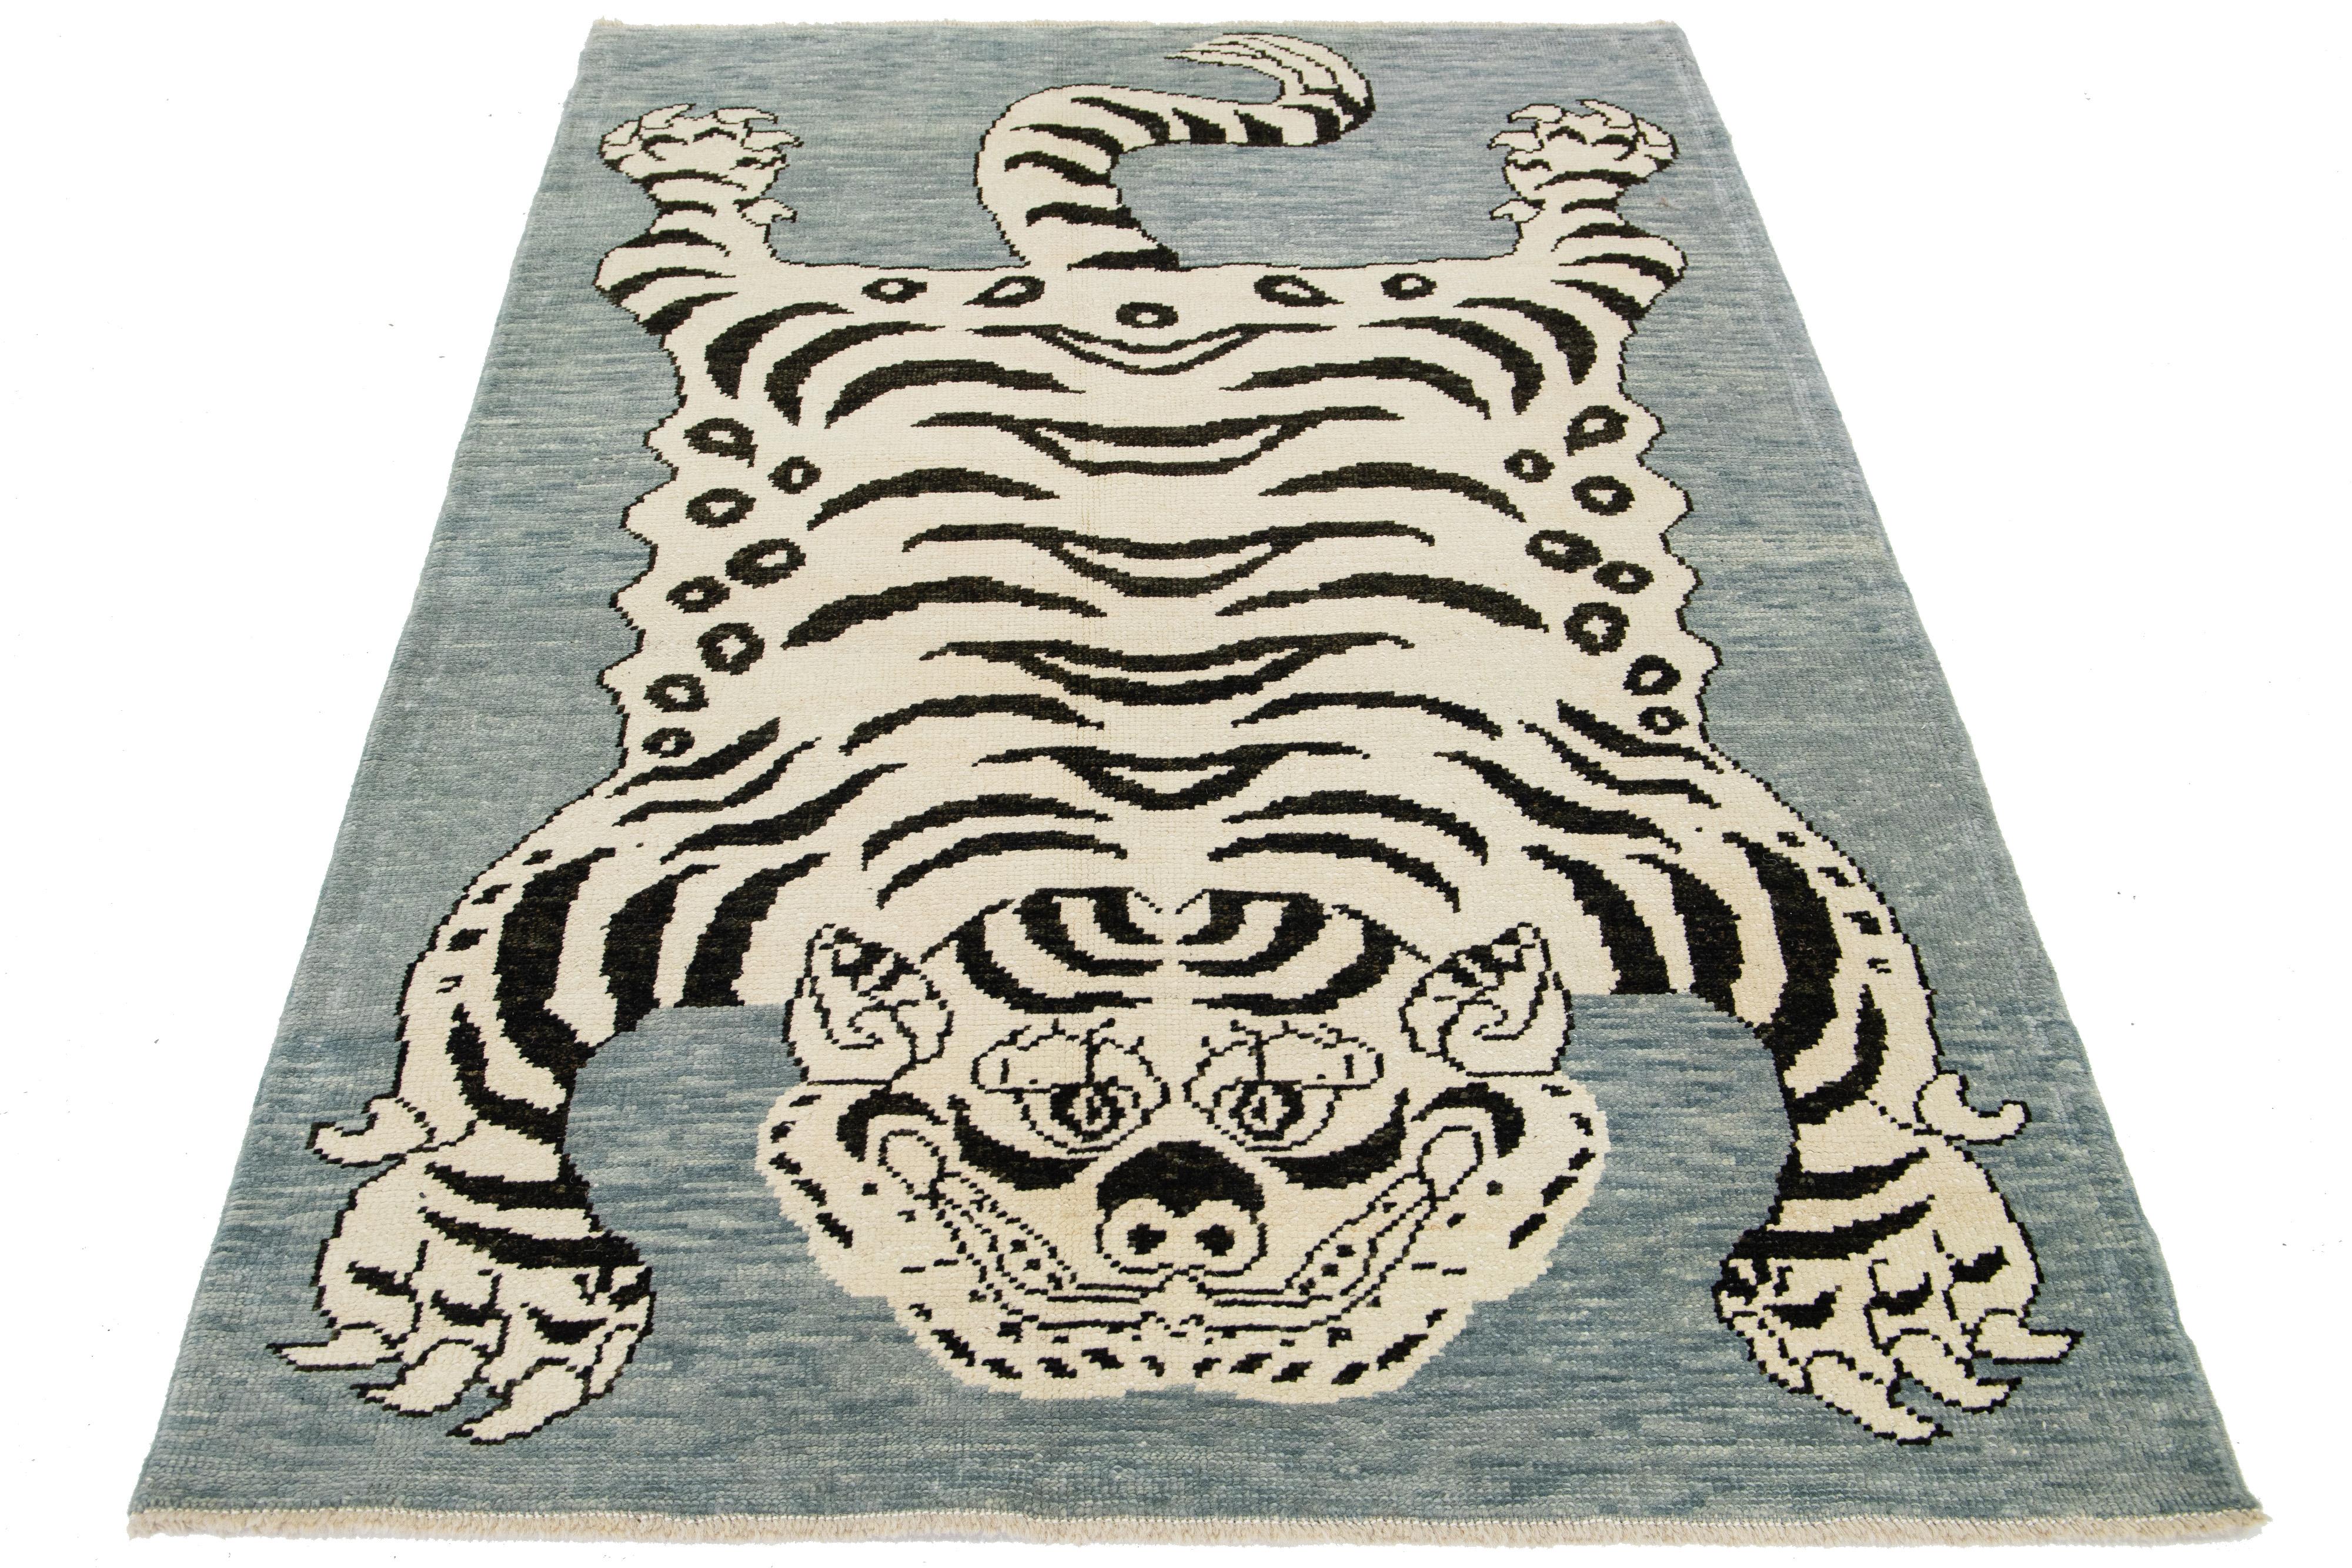 This beautiful Turkish Art Deco wool rug features a gray field with beige accent colors and a stunning tiger pictorial design.

This rug measures 4'9